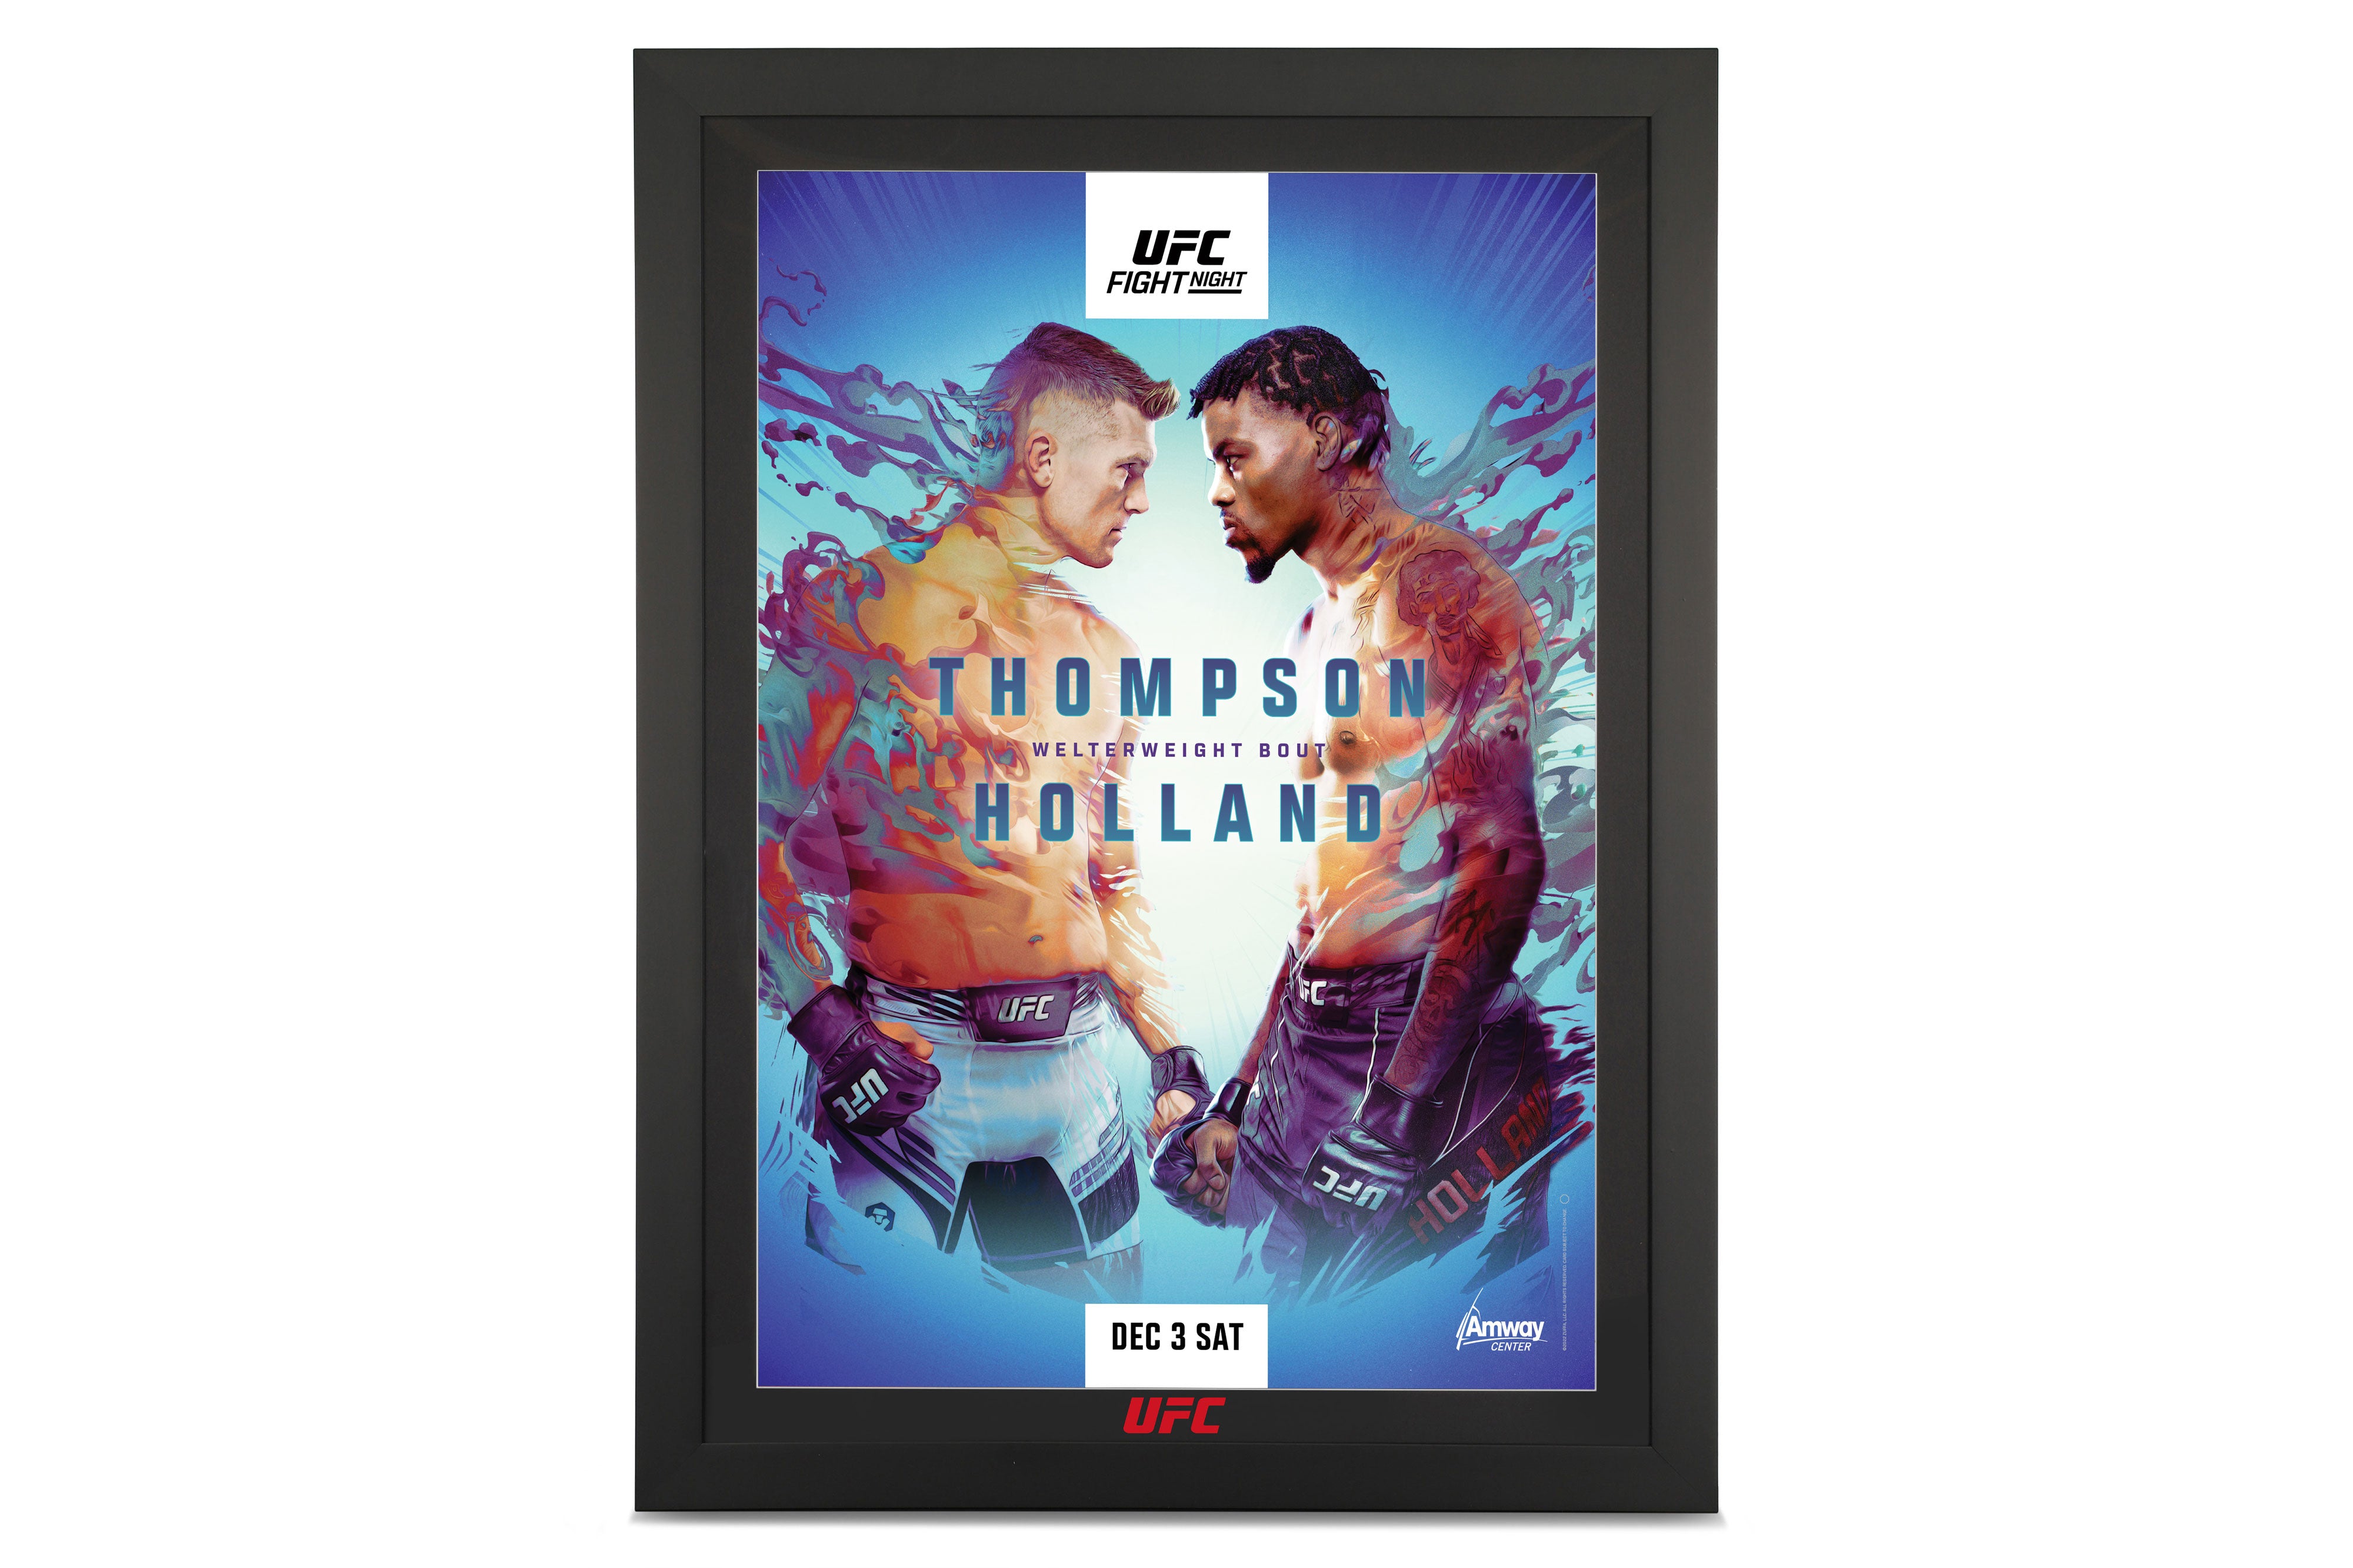 UFC Fight Night: Thompson vs Holland Autographed Event Poster